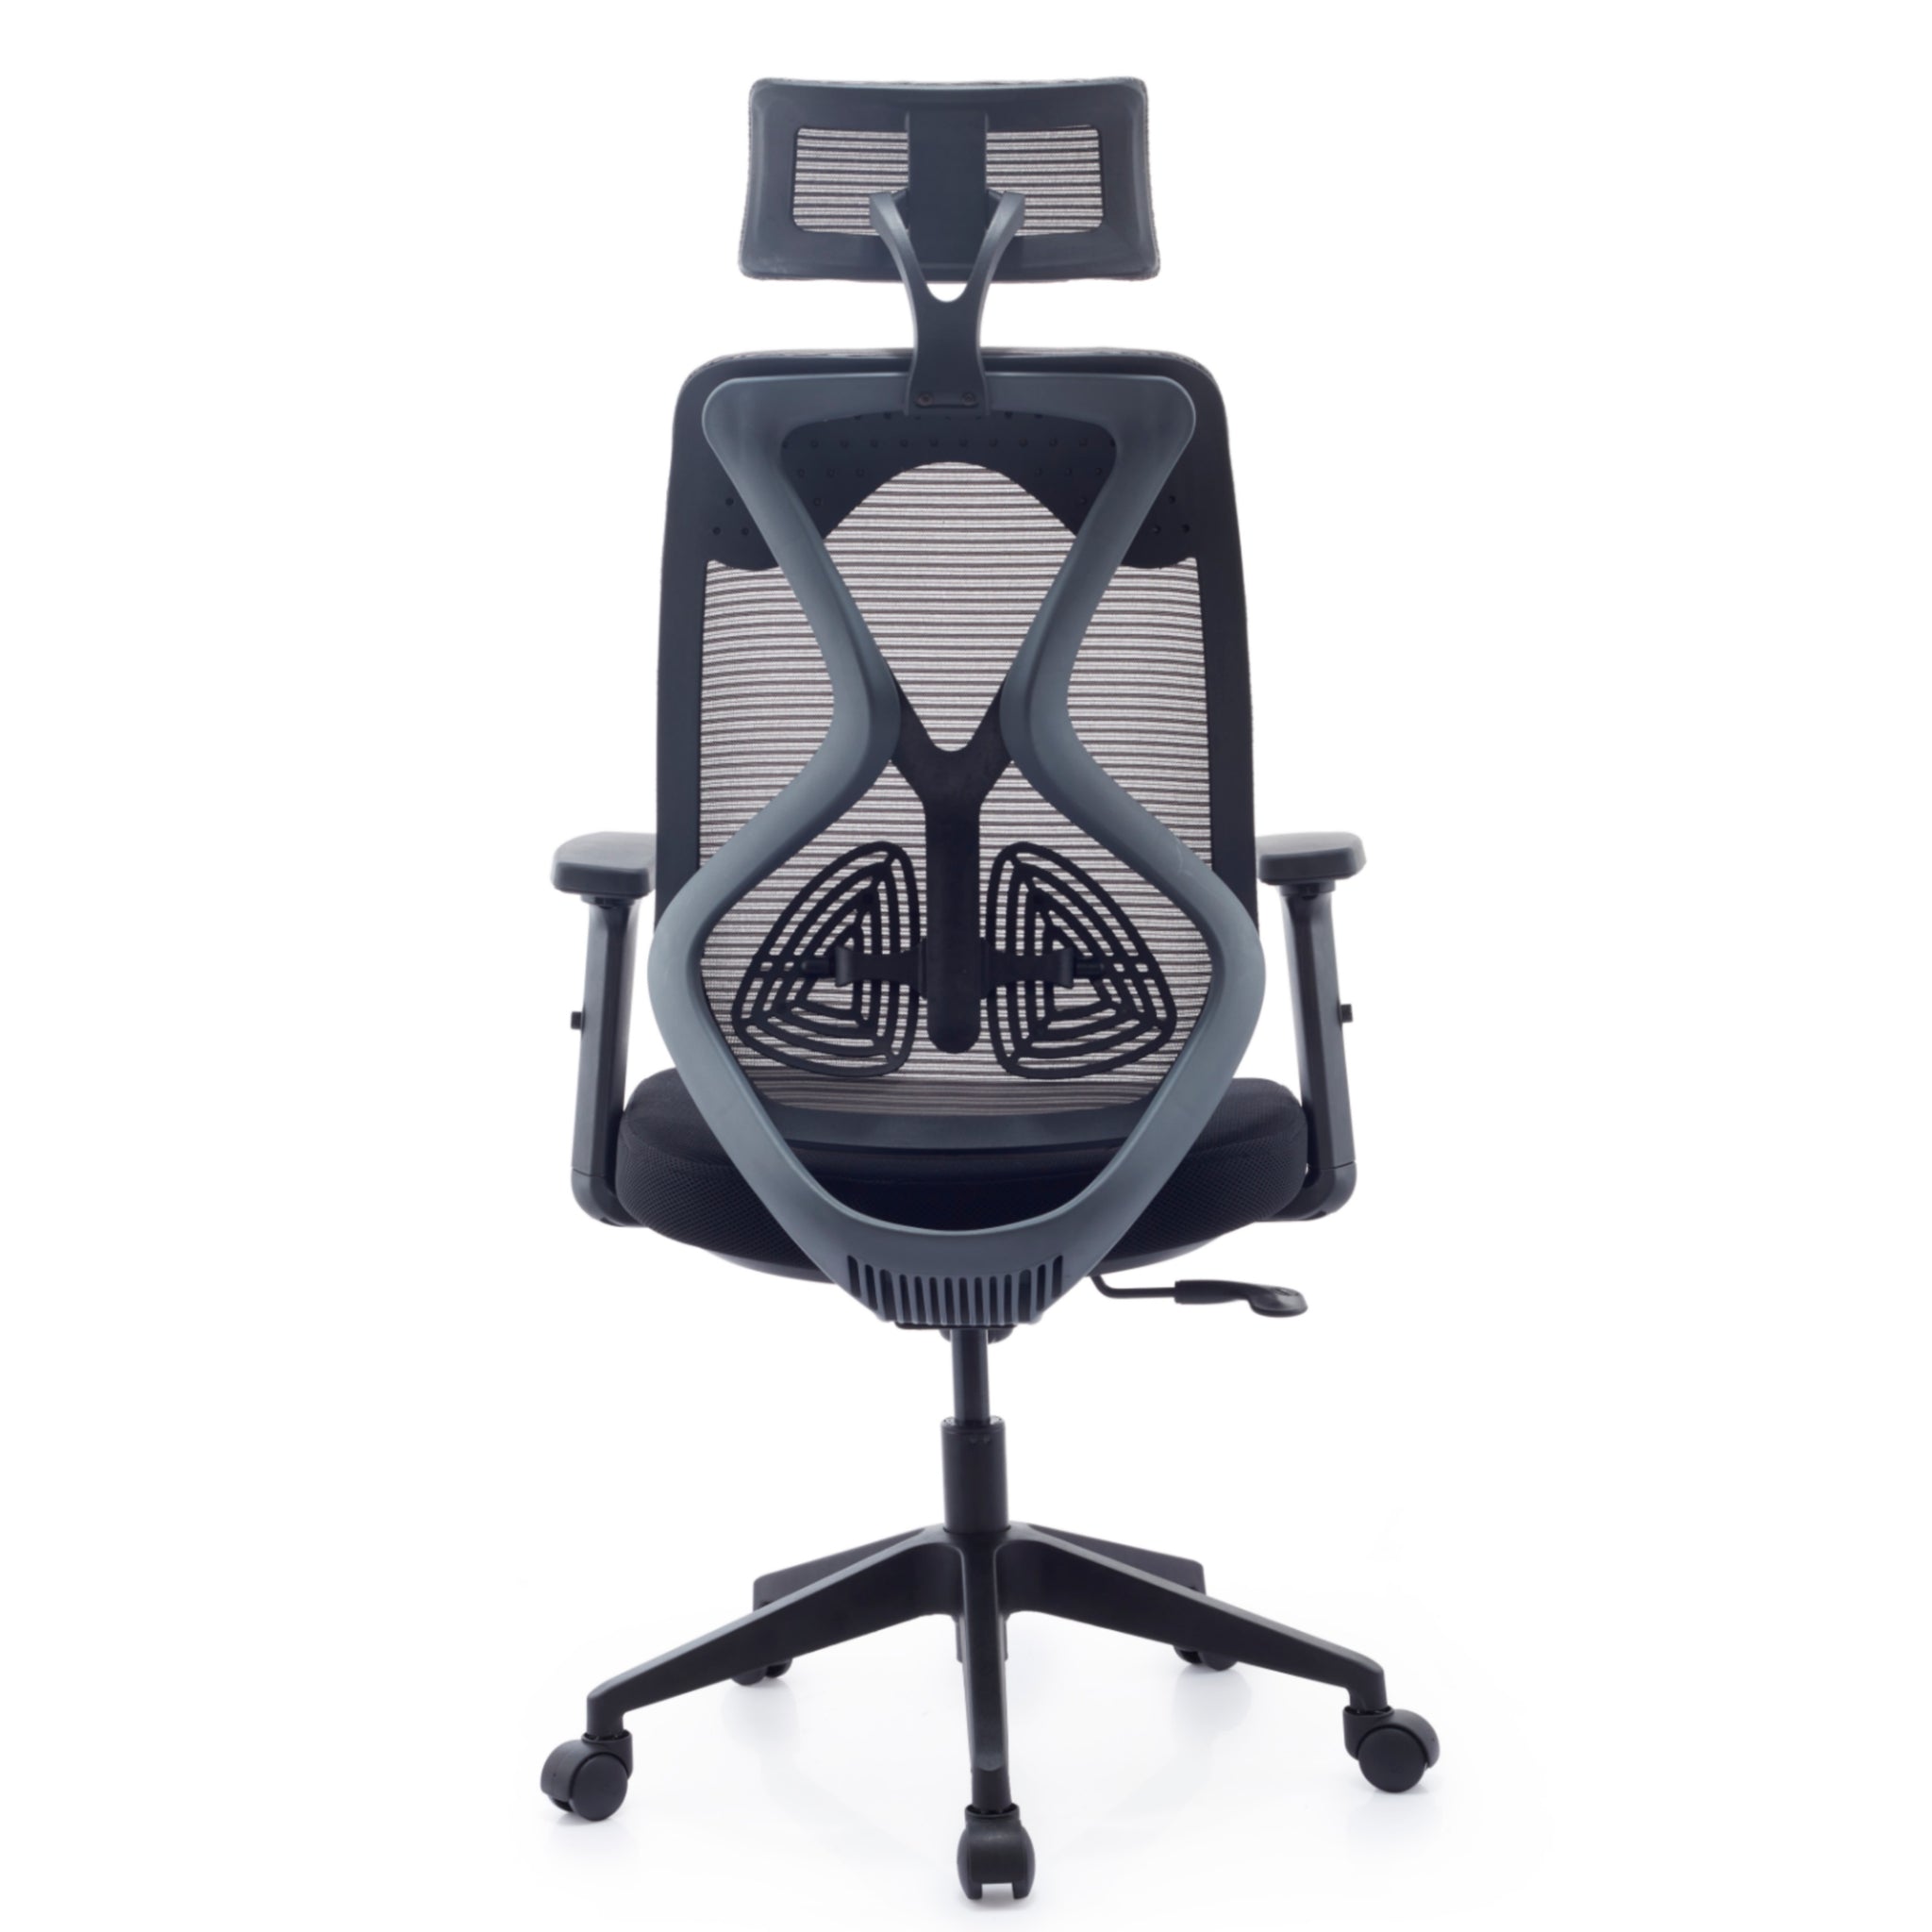 JD9 High Back Ergonomic Chair Cushion Seat with Advanced Syncro Tilt Mechanism, 2D Adjustable Arms & Headrest for Office & Home for Office & Home (Black & Grey)